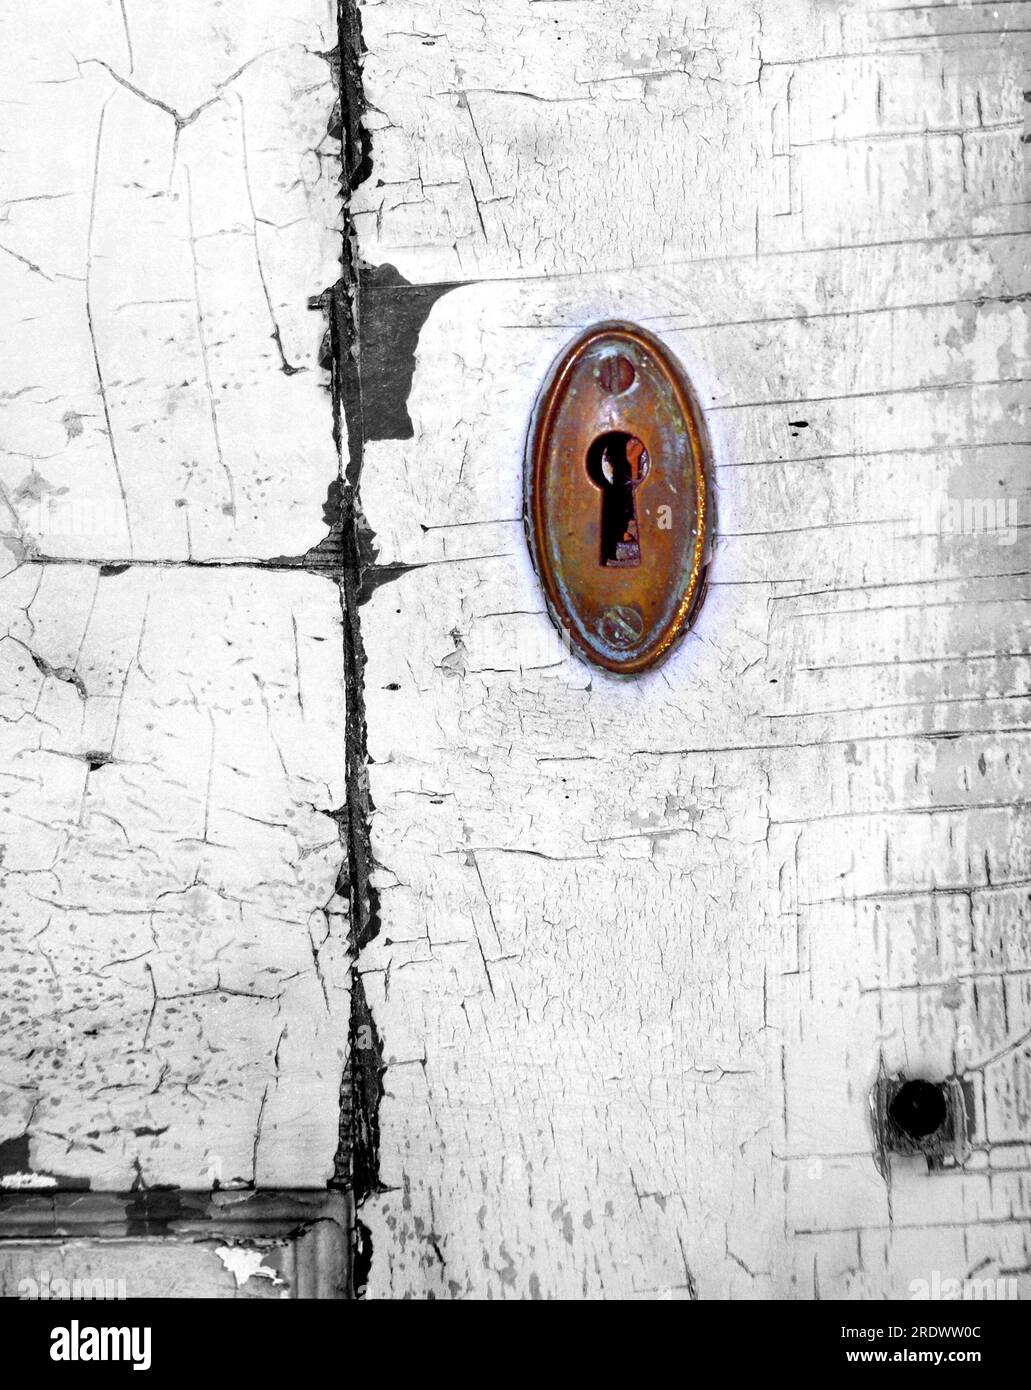 Colorized image of an antique keyhole.  Door facing is cracked and paint peeling.  Keyhole is brass and in need of a good polish. Stock Photo